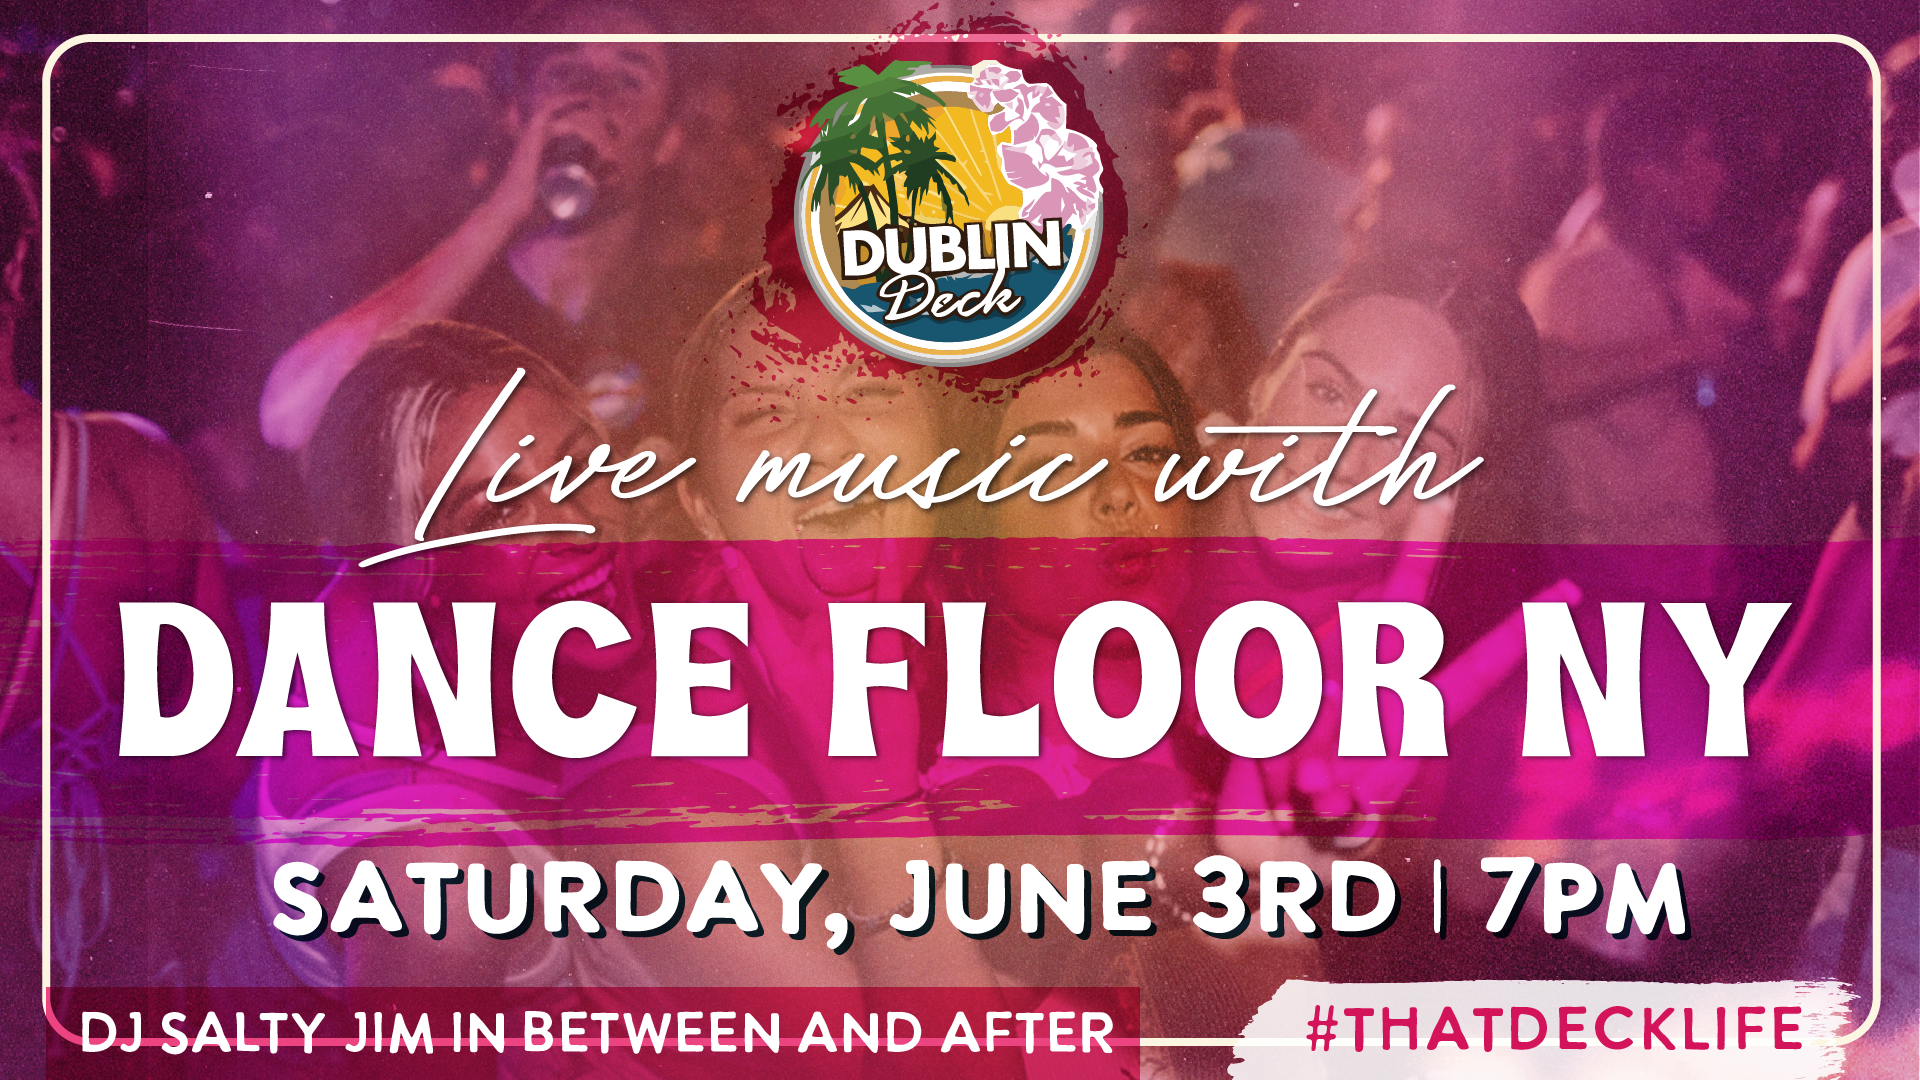 Dance the night away with Dance Floor NY! Music begins at 7PM